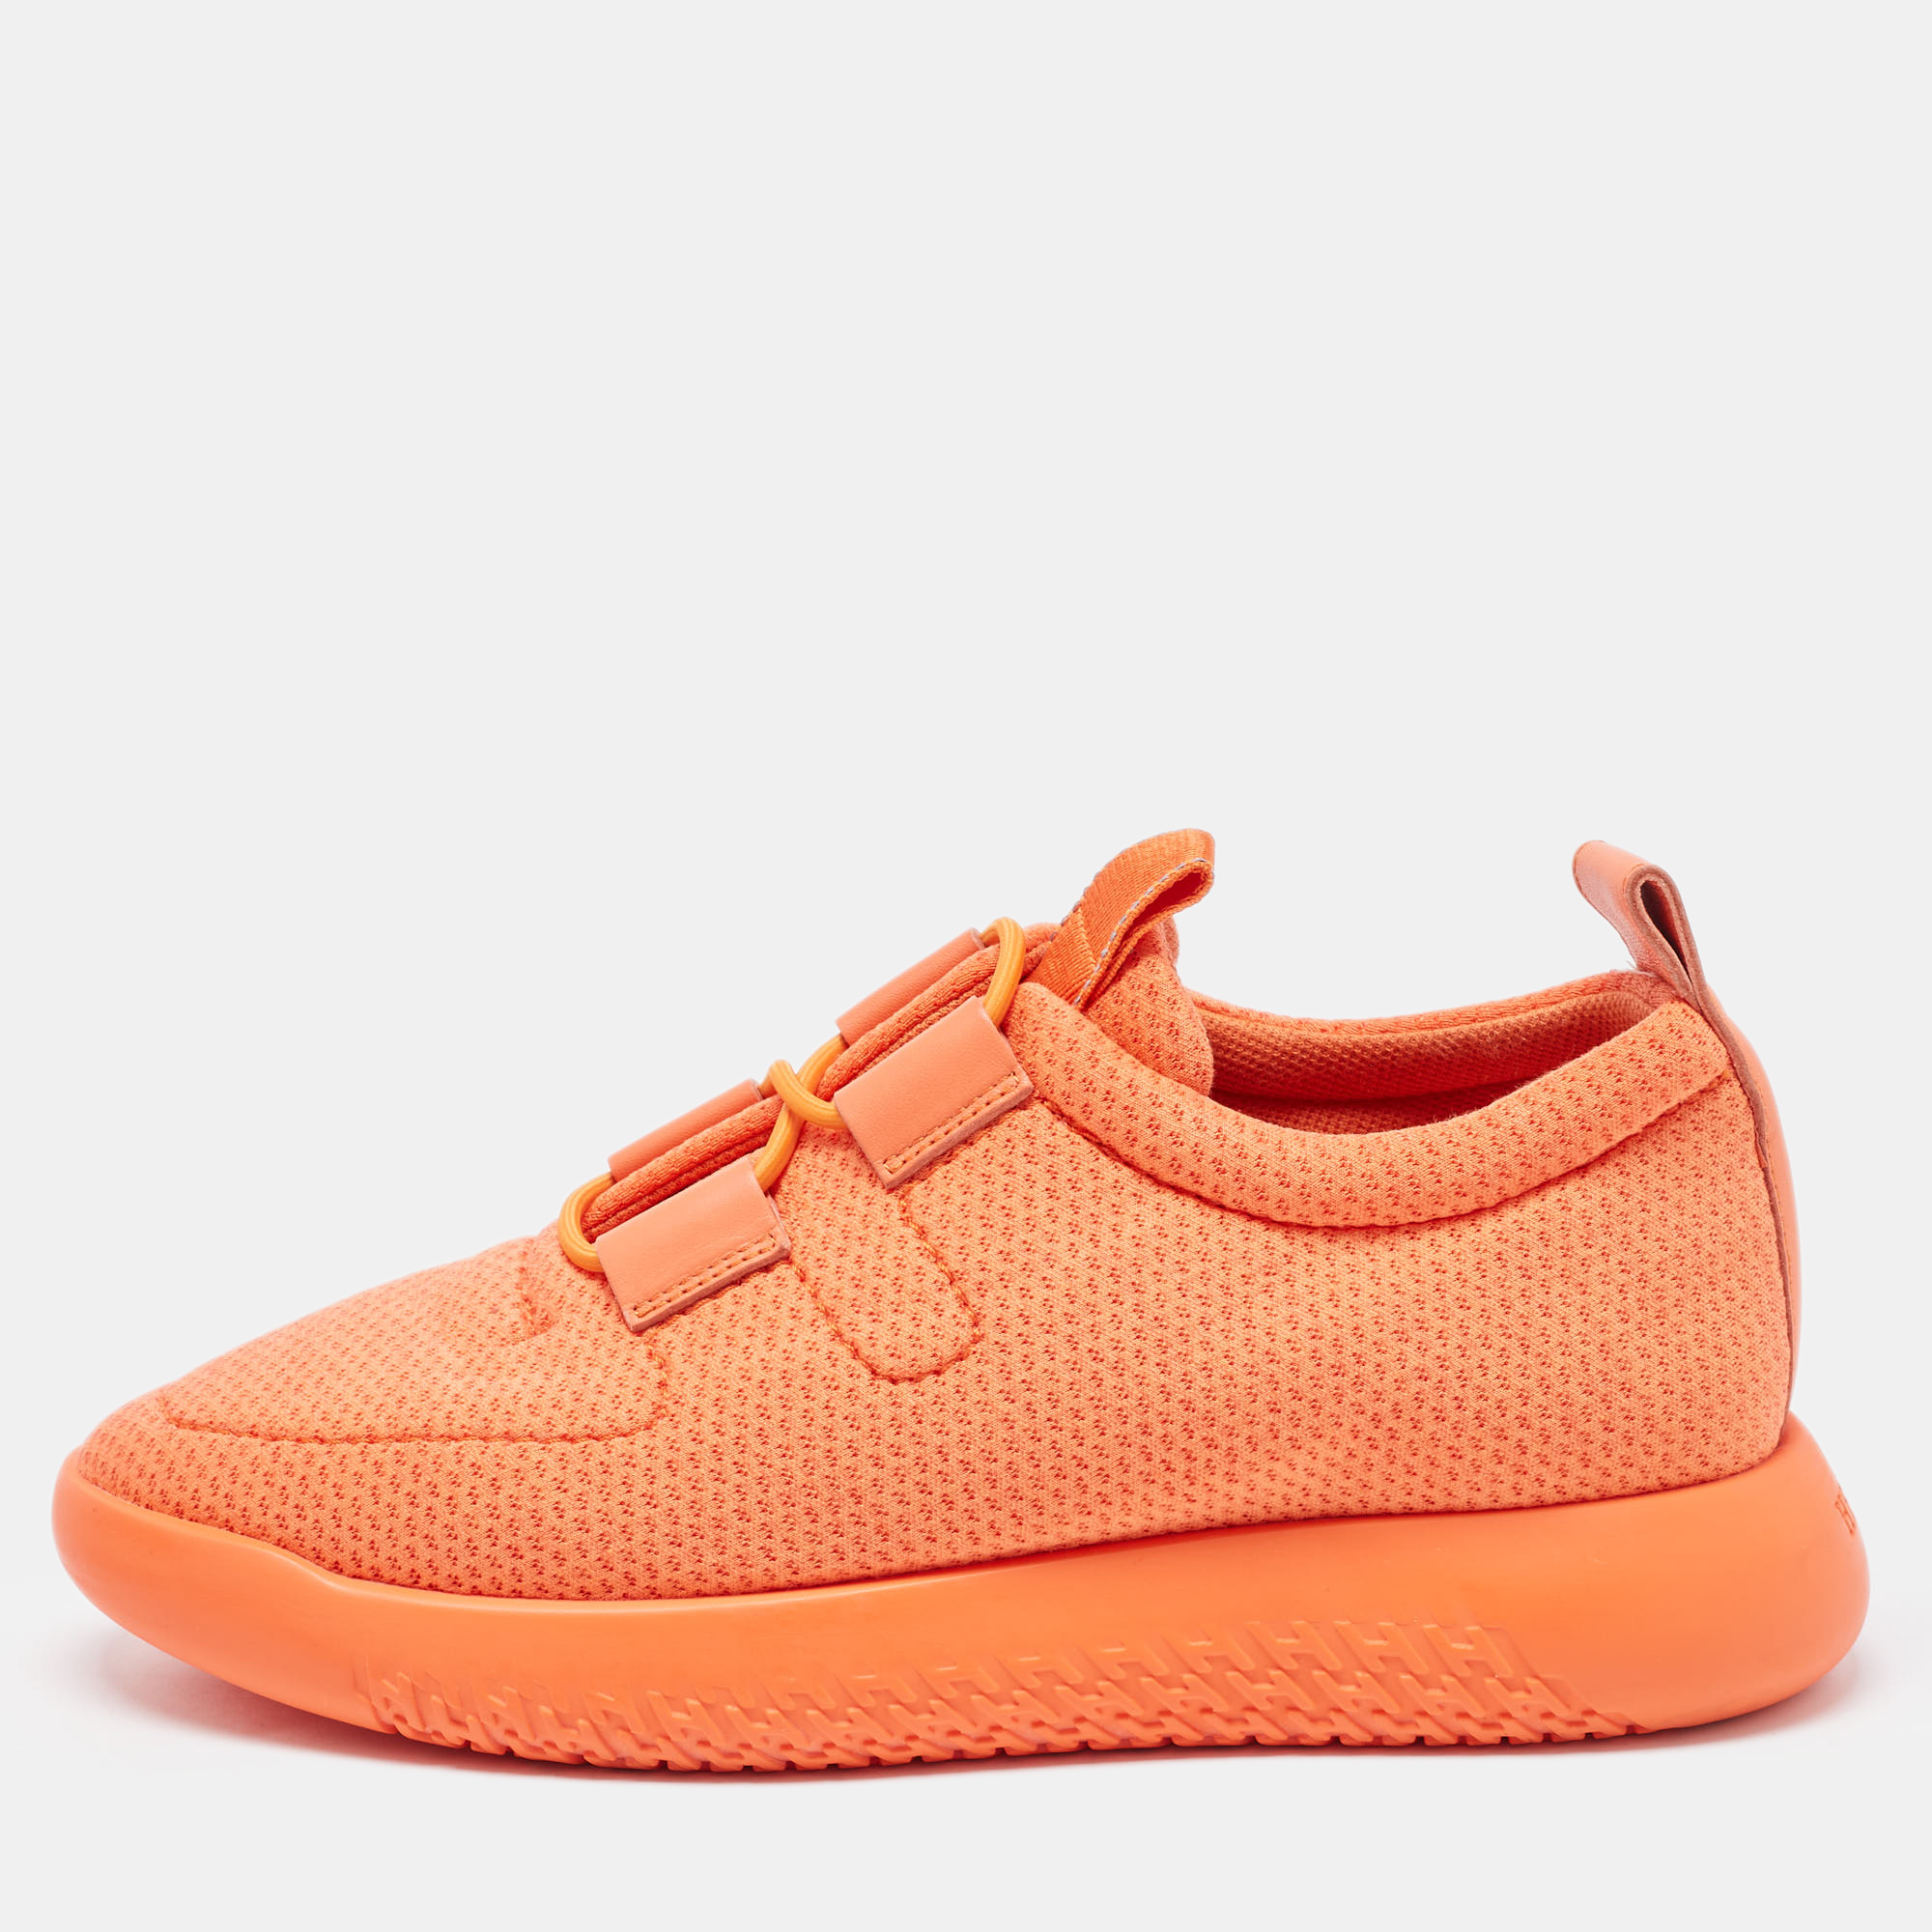 Hermès Orange Leather And Neoprene Low Top Sneakers Size 36